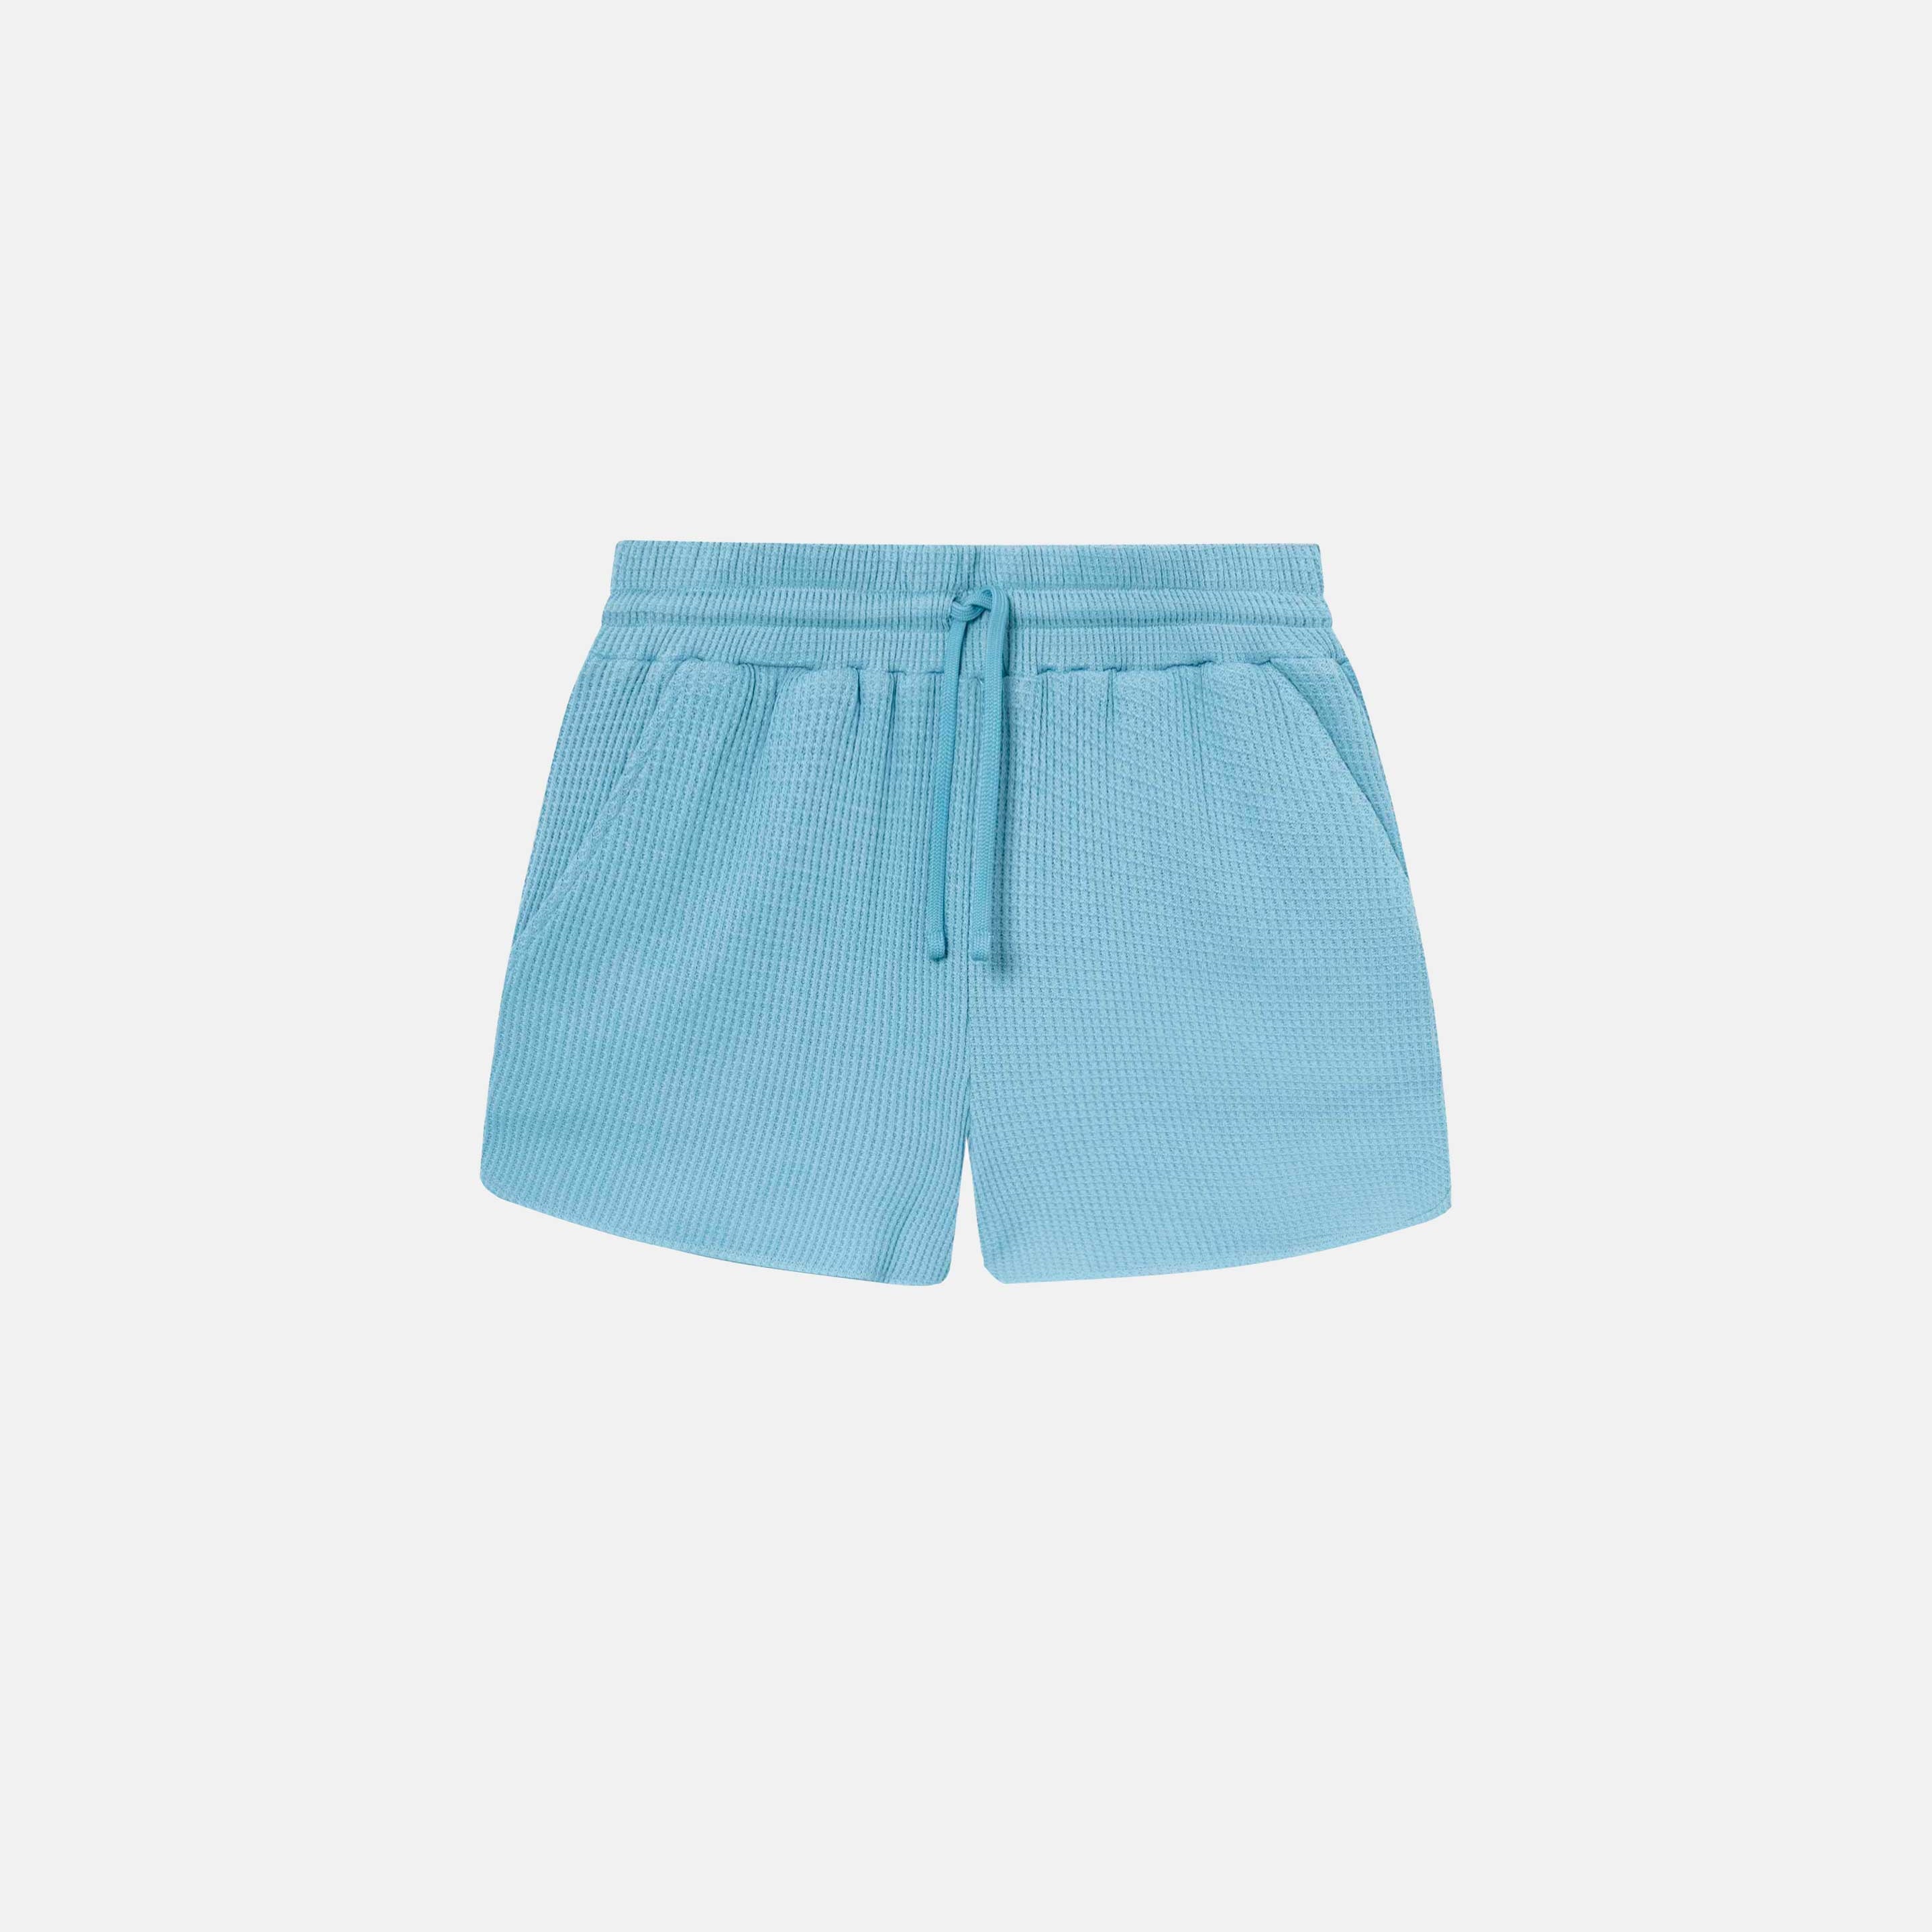 Sky blue waffle-patterned short-length shorts with two front pockets and a drawstring.